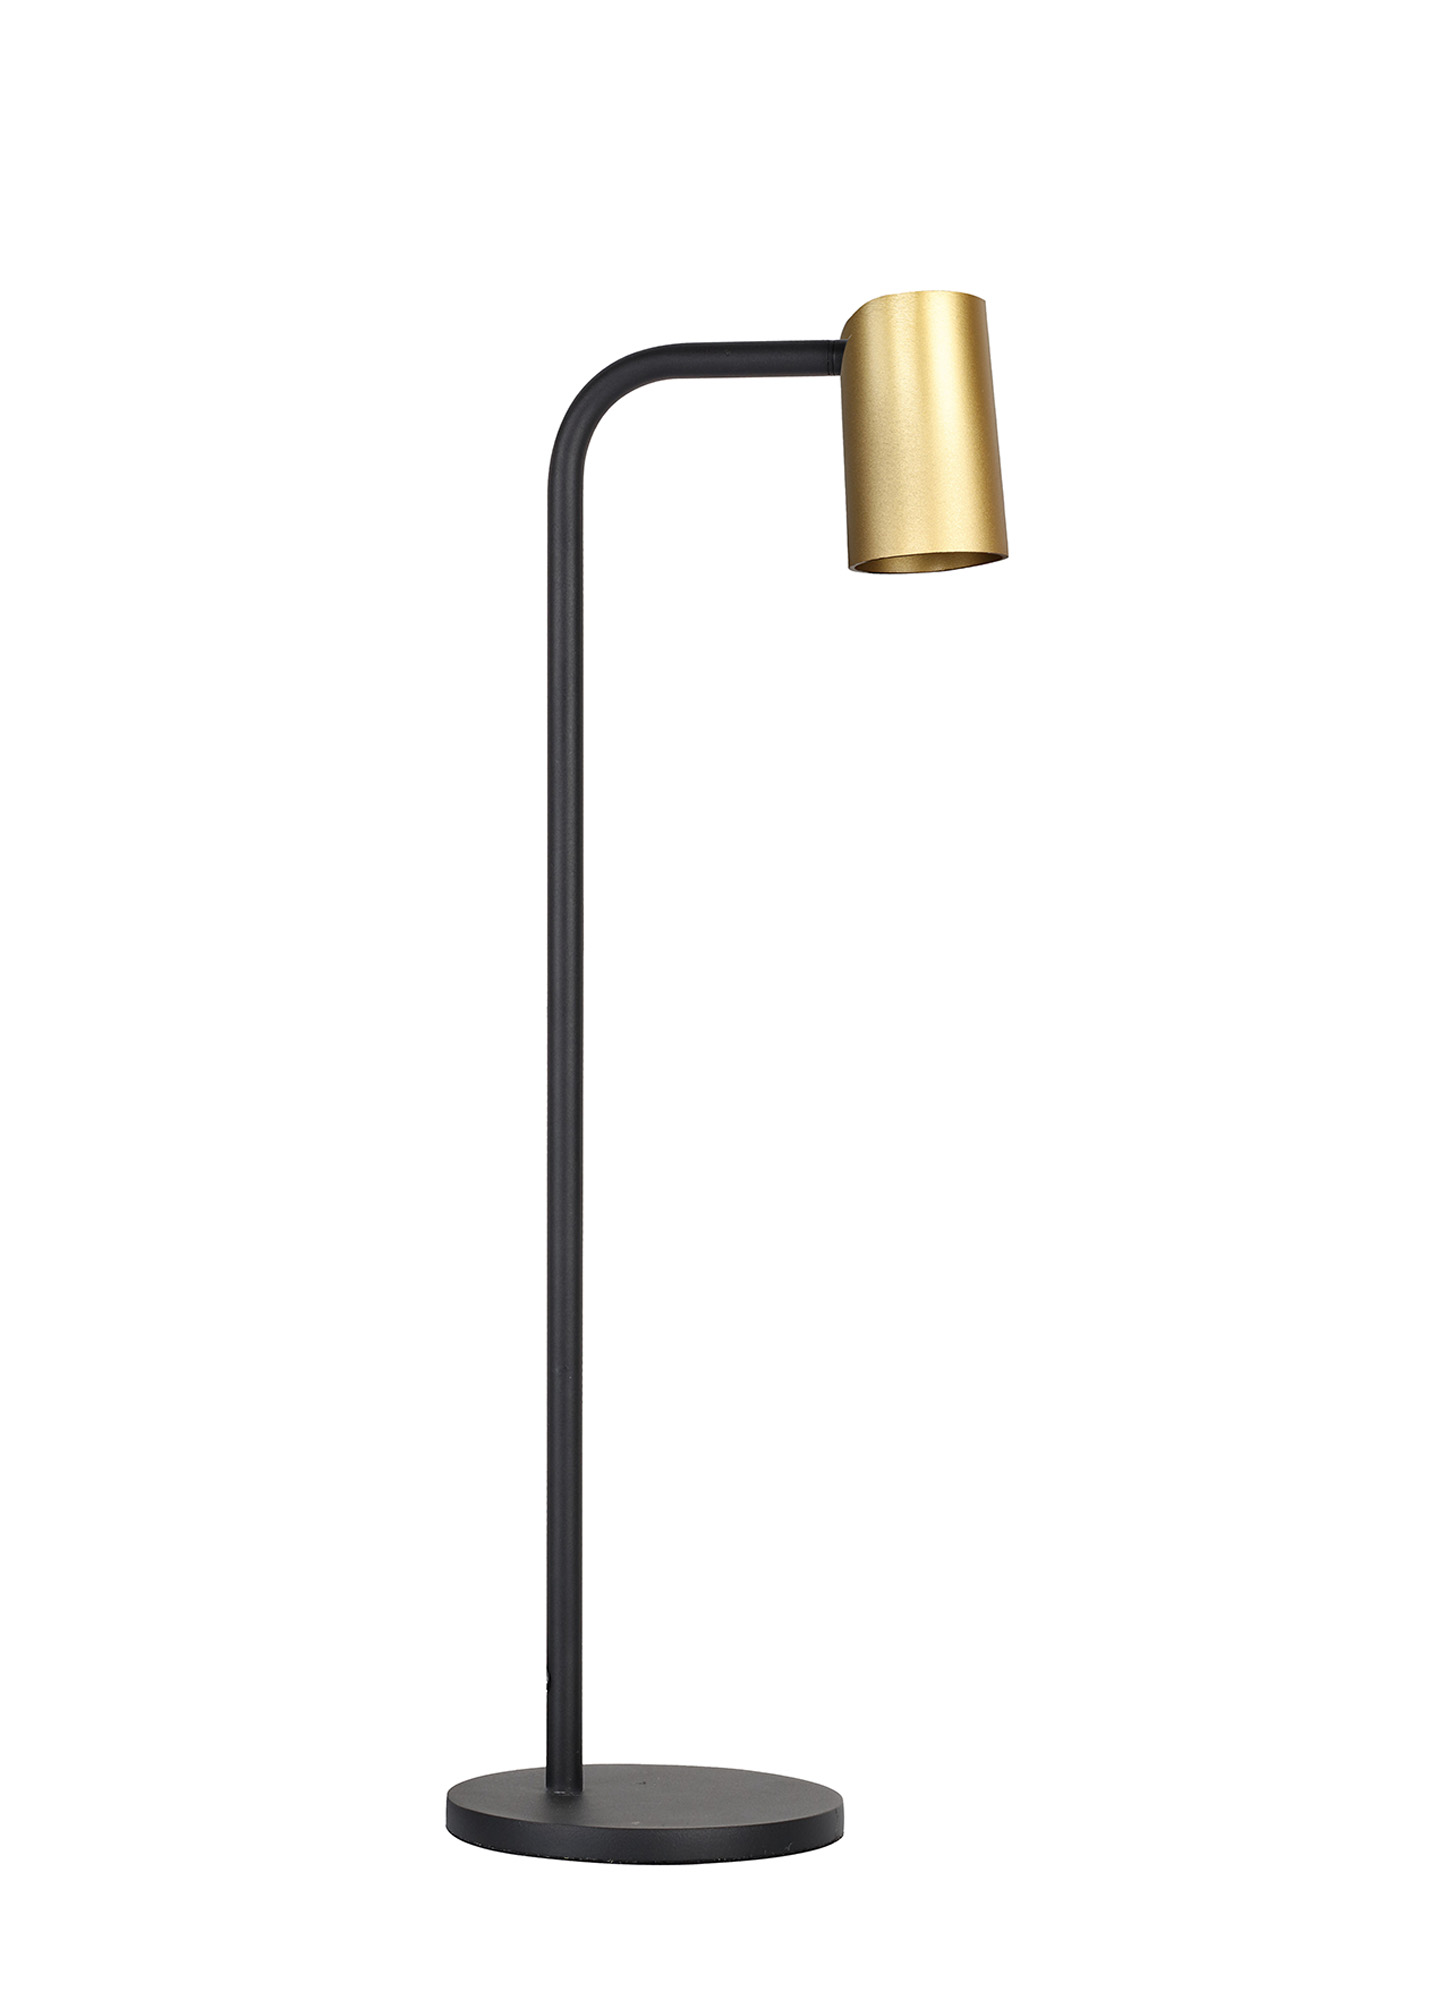 Sal Satin Gold Table Lamps Mantra Fusion Desk & Task Lamps